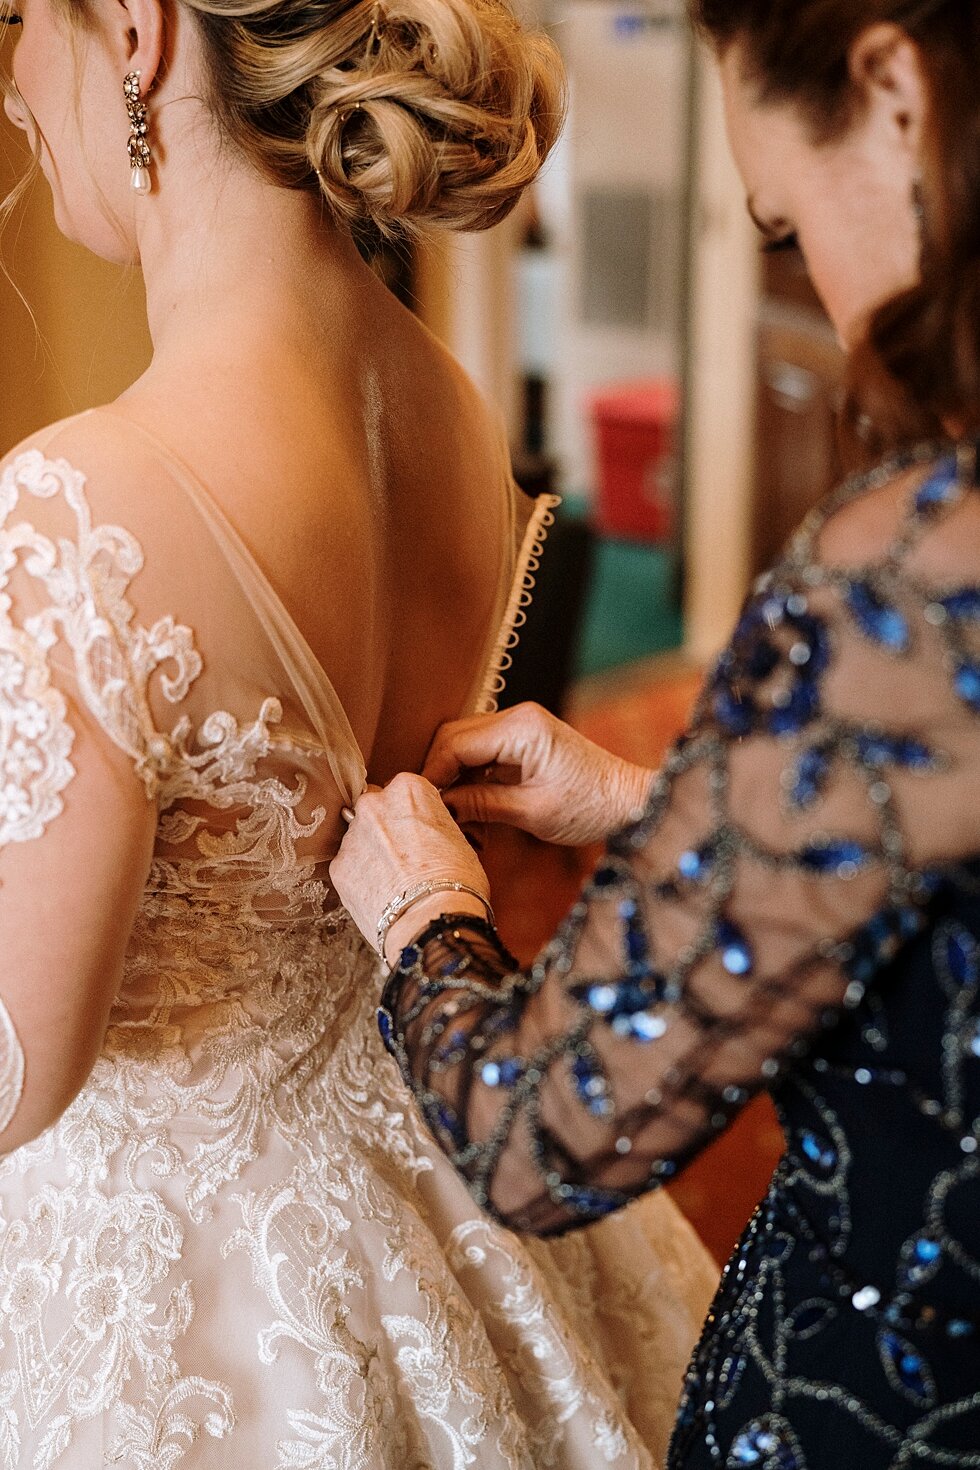  Stunning lace detail on the brides dress as her mother helps her finish getting ready to get married. Brisk February winter wedding Pendennis Club Louisville, Kentucky southern wedding bride and groom carefree wedding breathtaking national register 